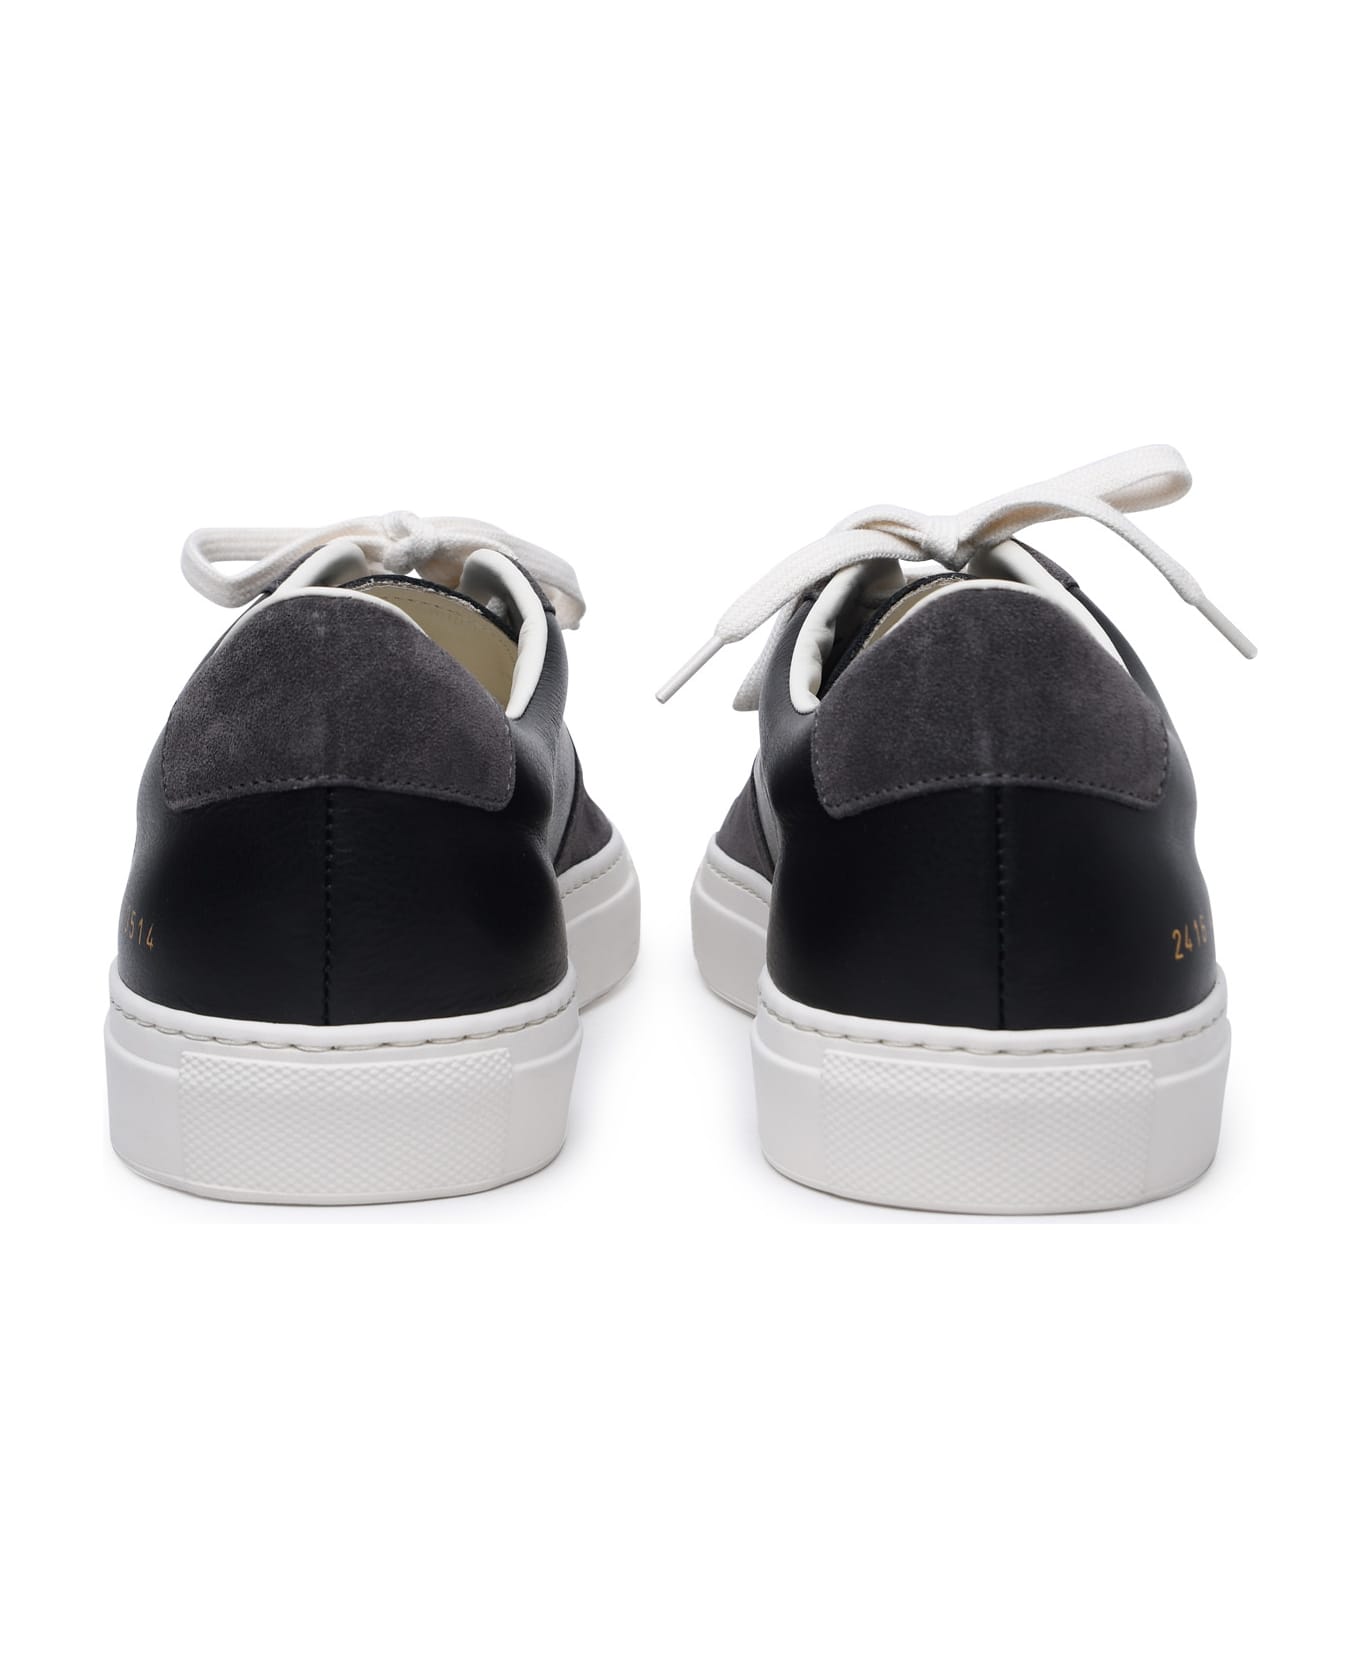 Common Projects Bball Duo Sneakers - Black